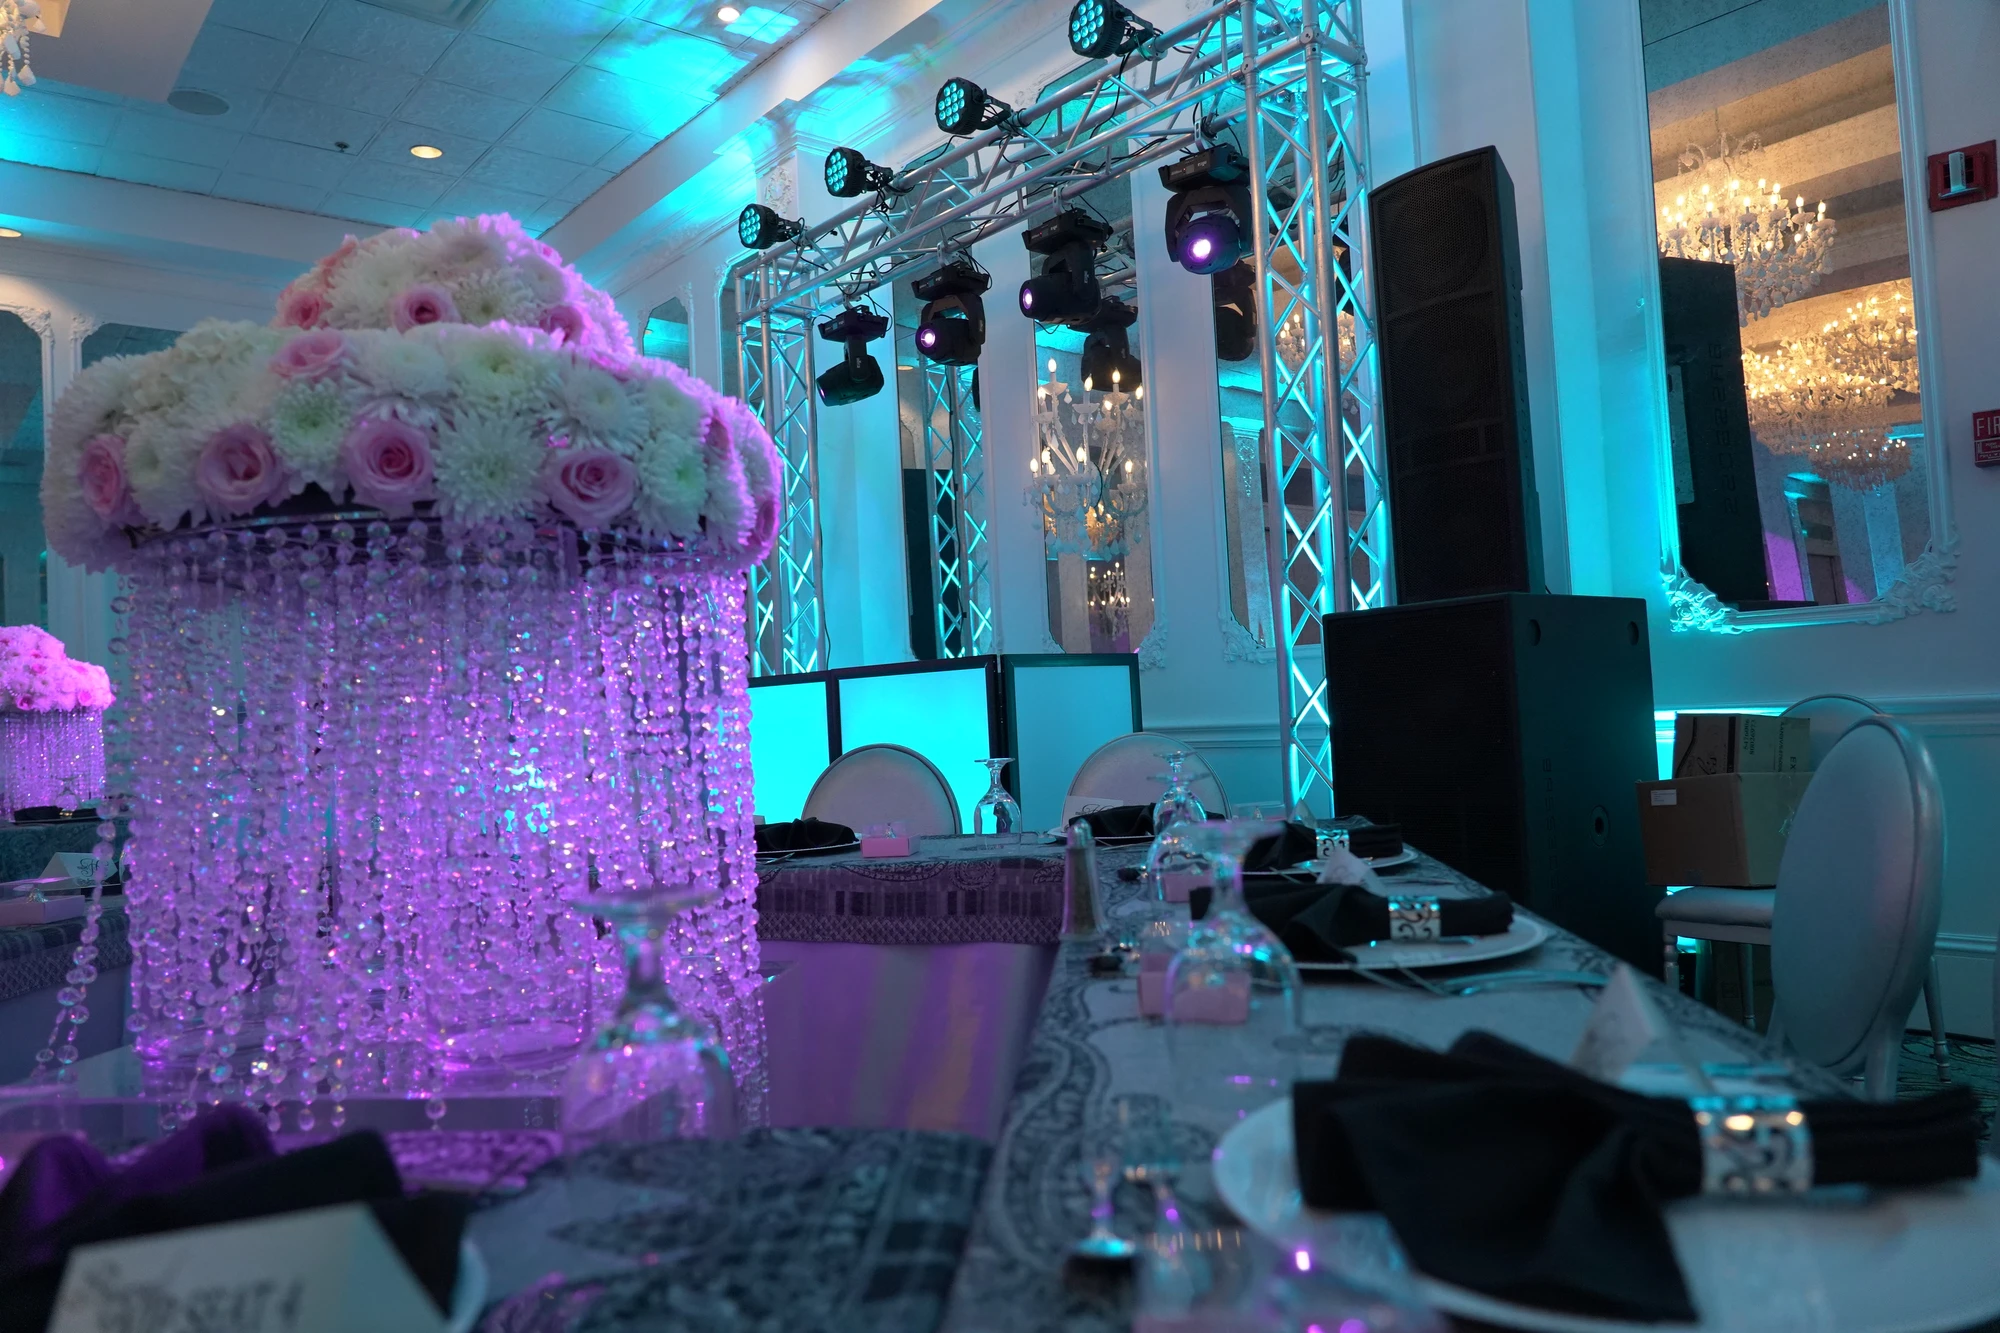 Wedding Production Services in Tallahassee | JPC Entertainment